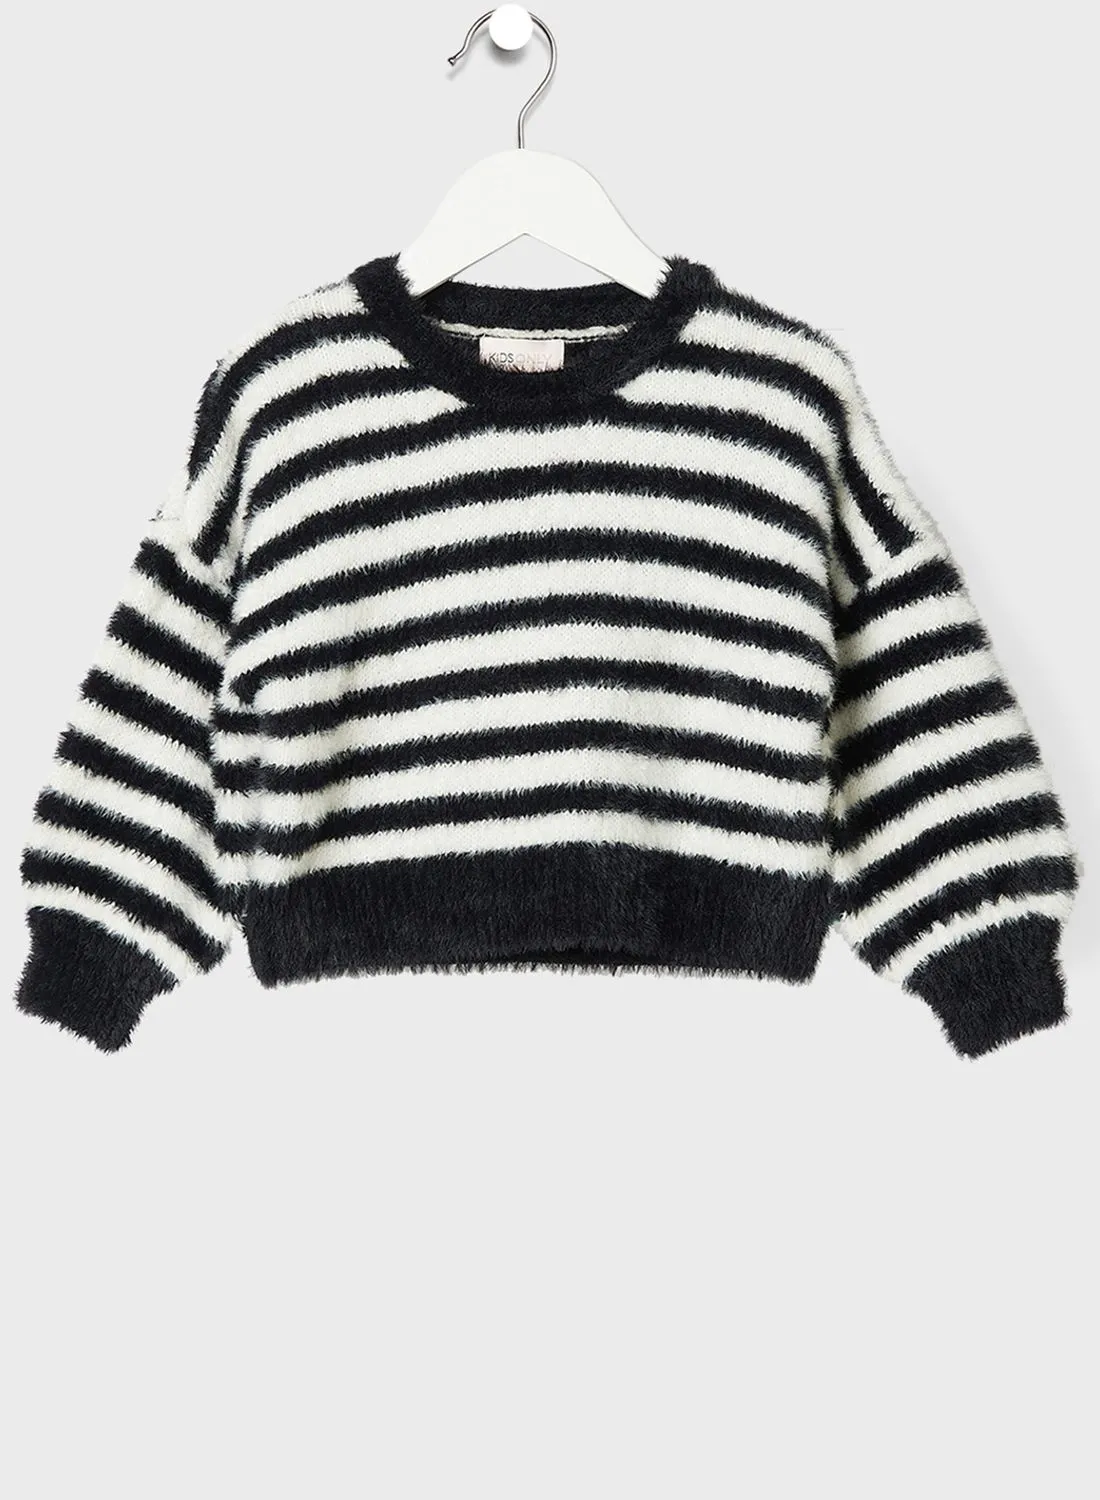 ONLY Kids Knitted Striped Sweatshirt